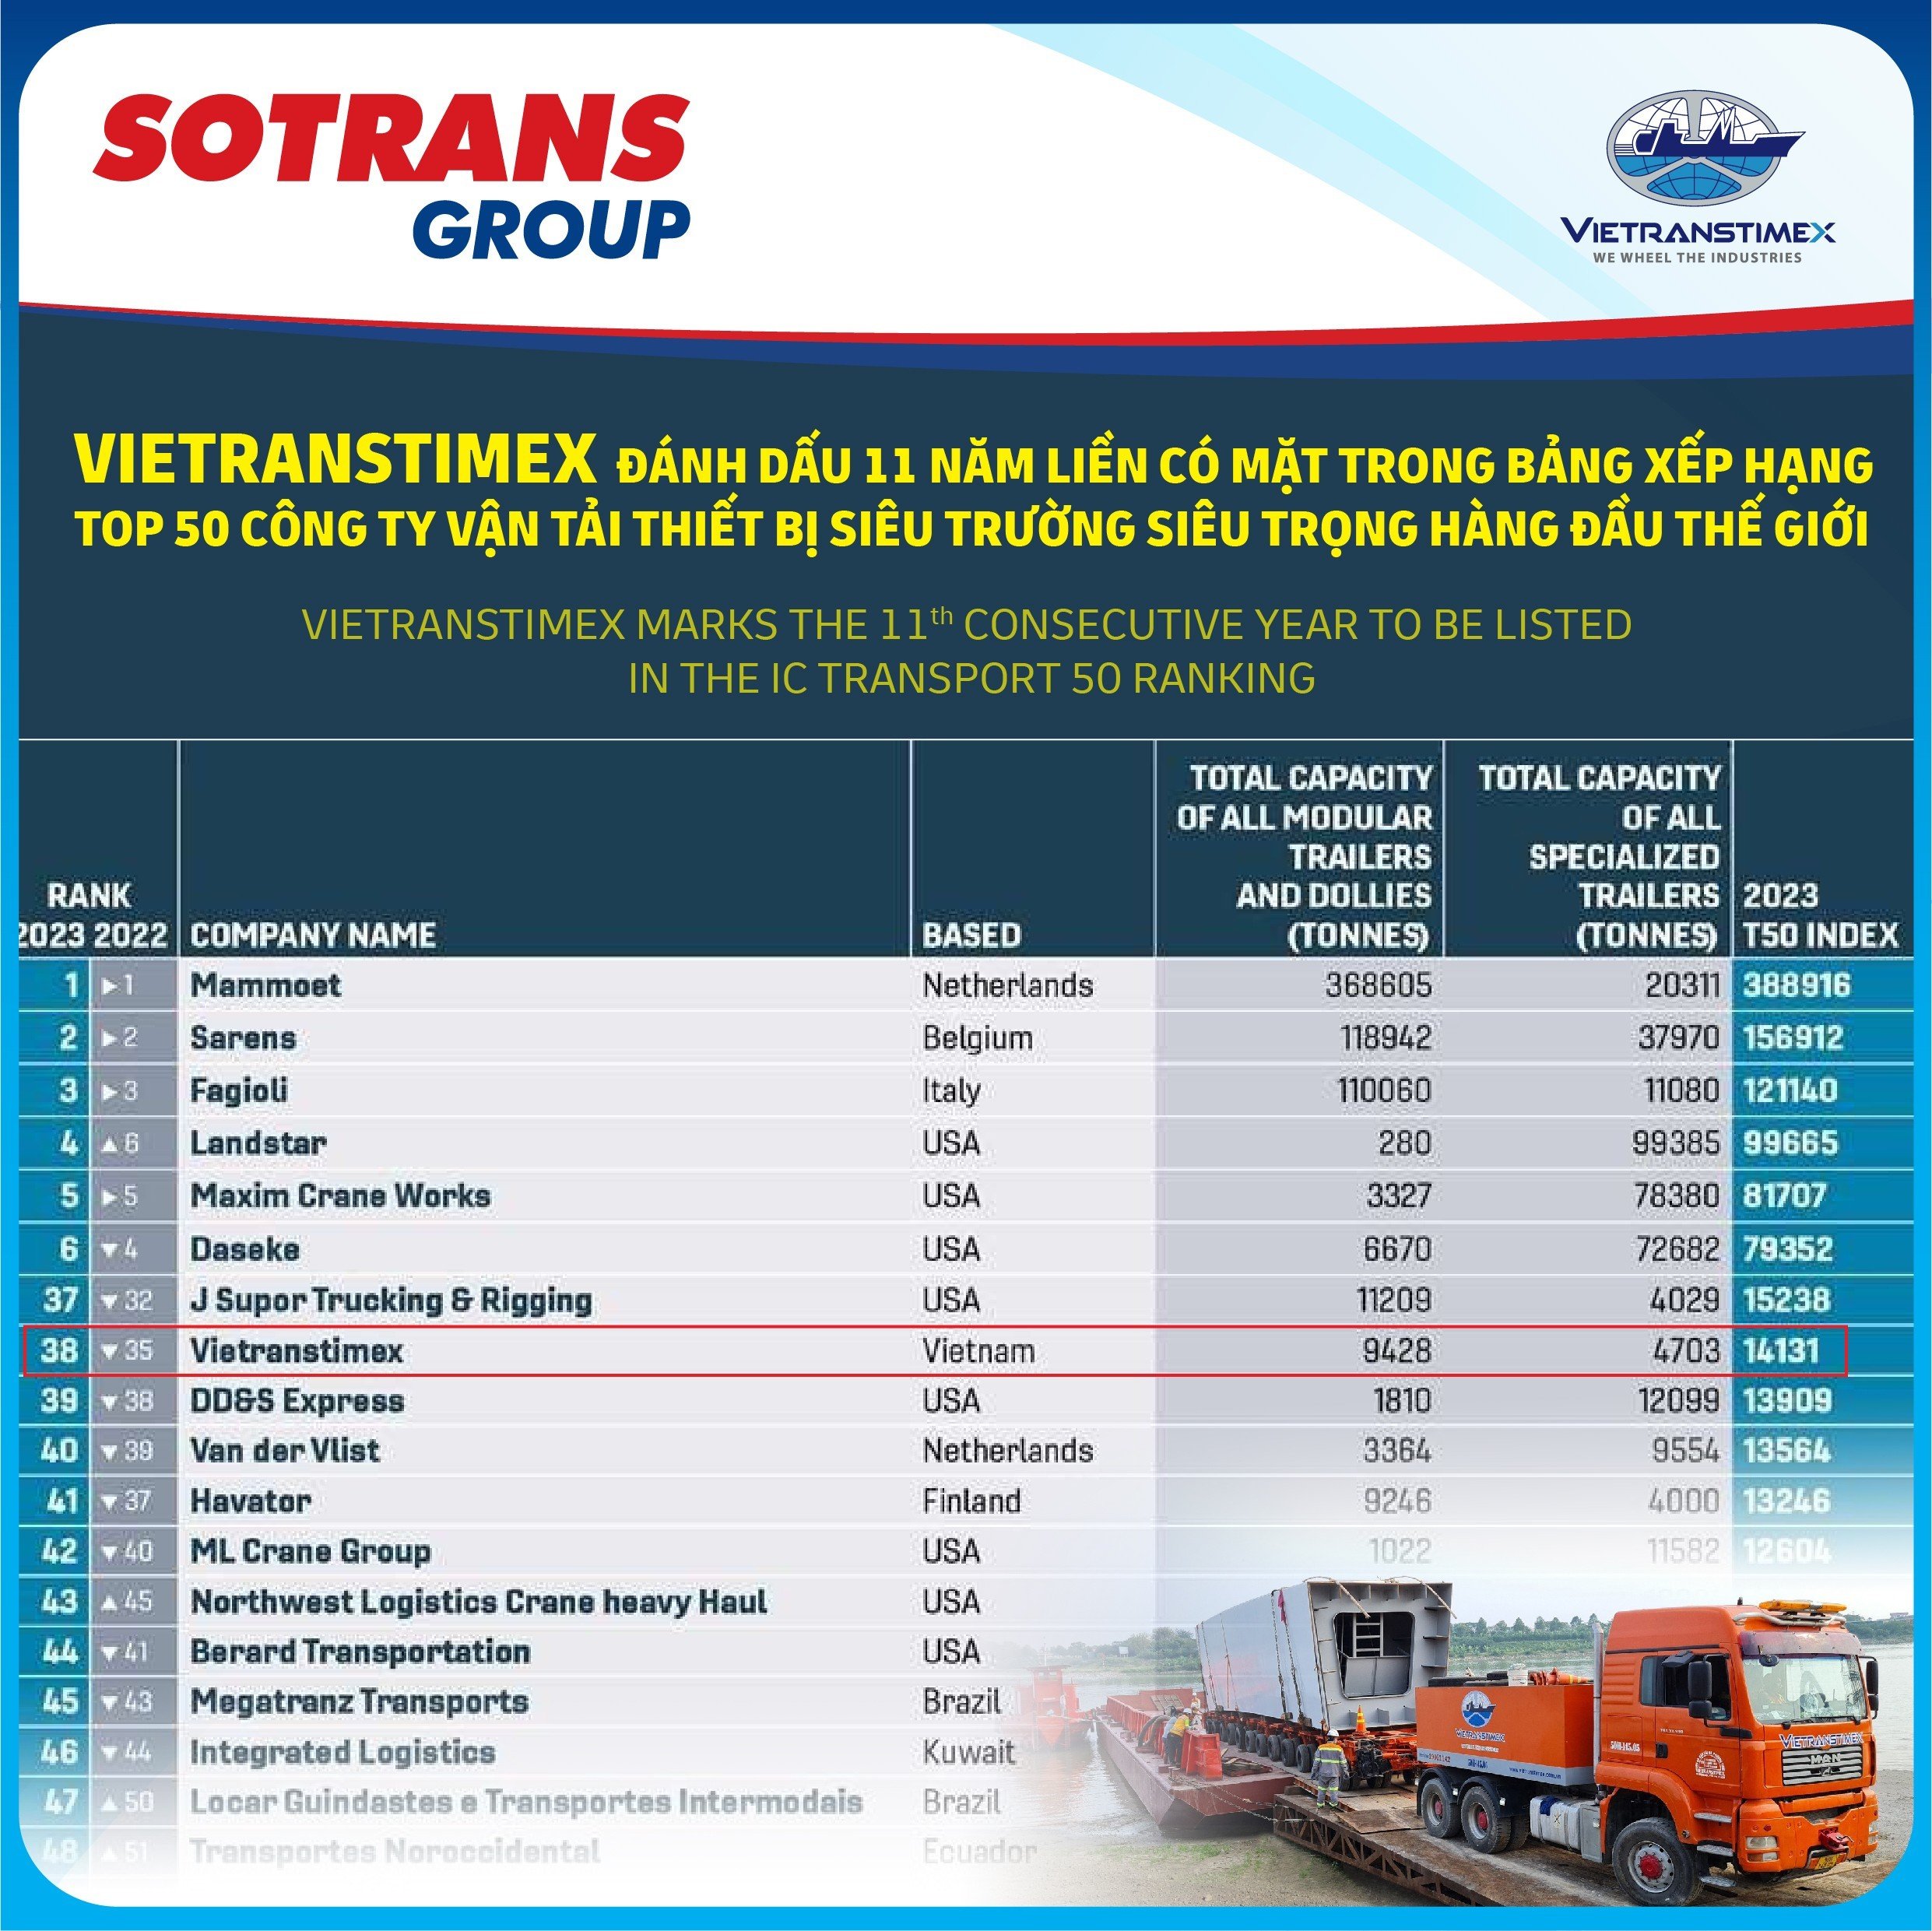 VIETRANSTIMEX MARKS THE 11th CONSECUTIVE YEAR TO BE LISTED IN THE IC TRANSPORT 50 RANKING